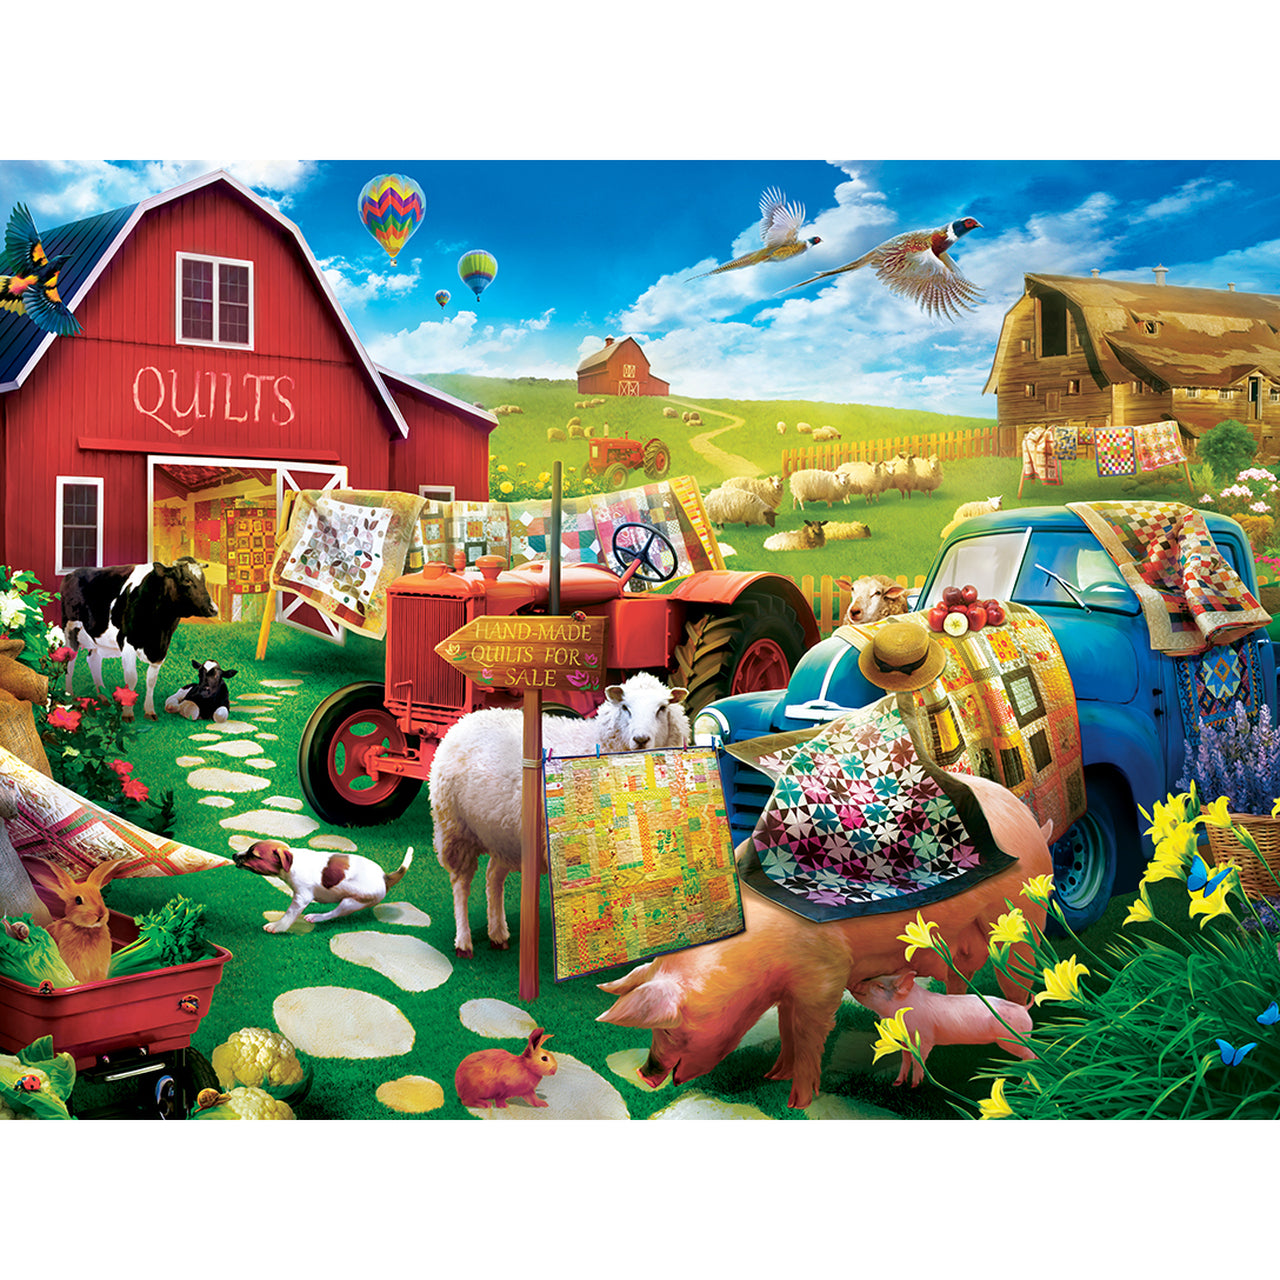 Quilt Country 300 Piece Large Format Green Acres Puzzle    